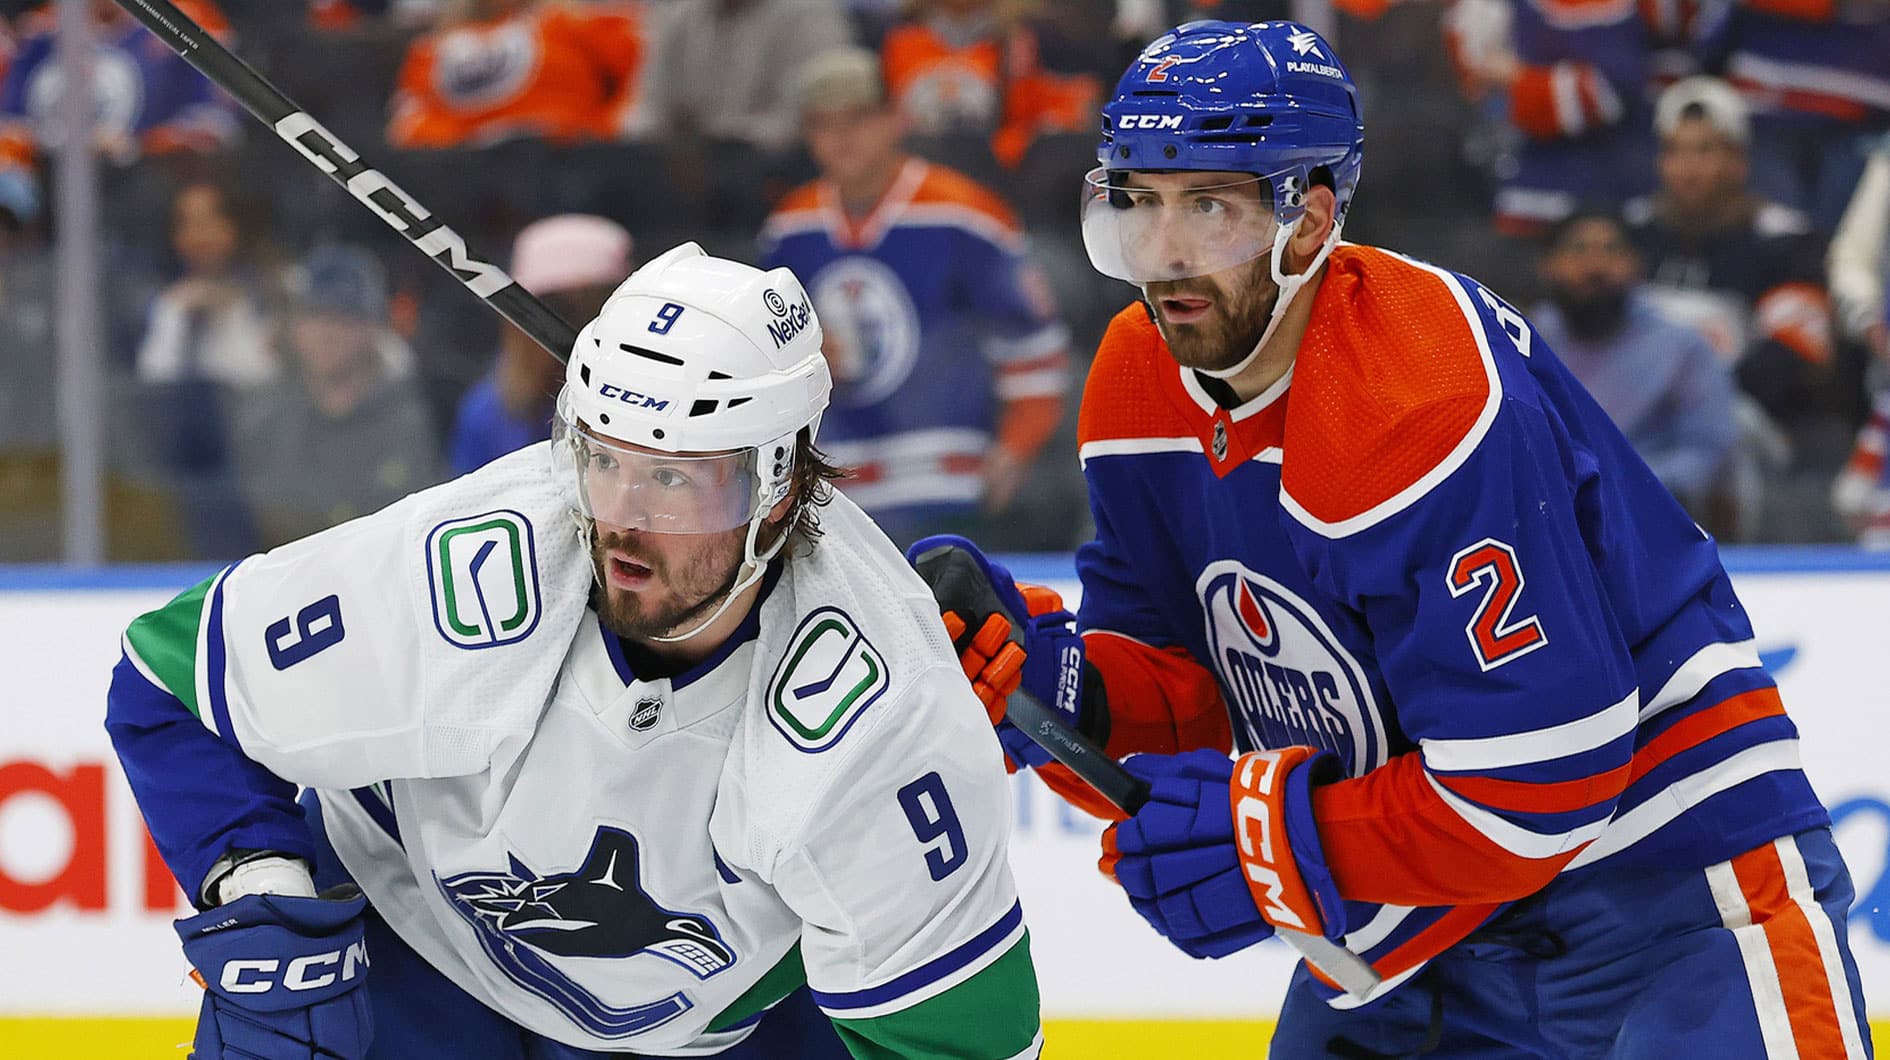 Vancouver Canucks forward J.T. Miller (9) and Edmonton Oilers defensemen Evan Bouchard (2) battle for position during the second period in game six of the second round of the 2024 Stanley Cup Playoffs at Rogers Place.